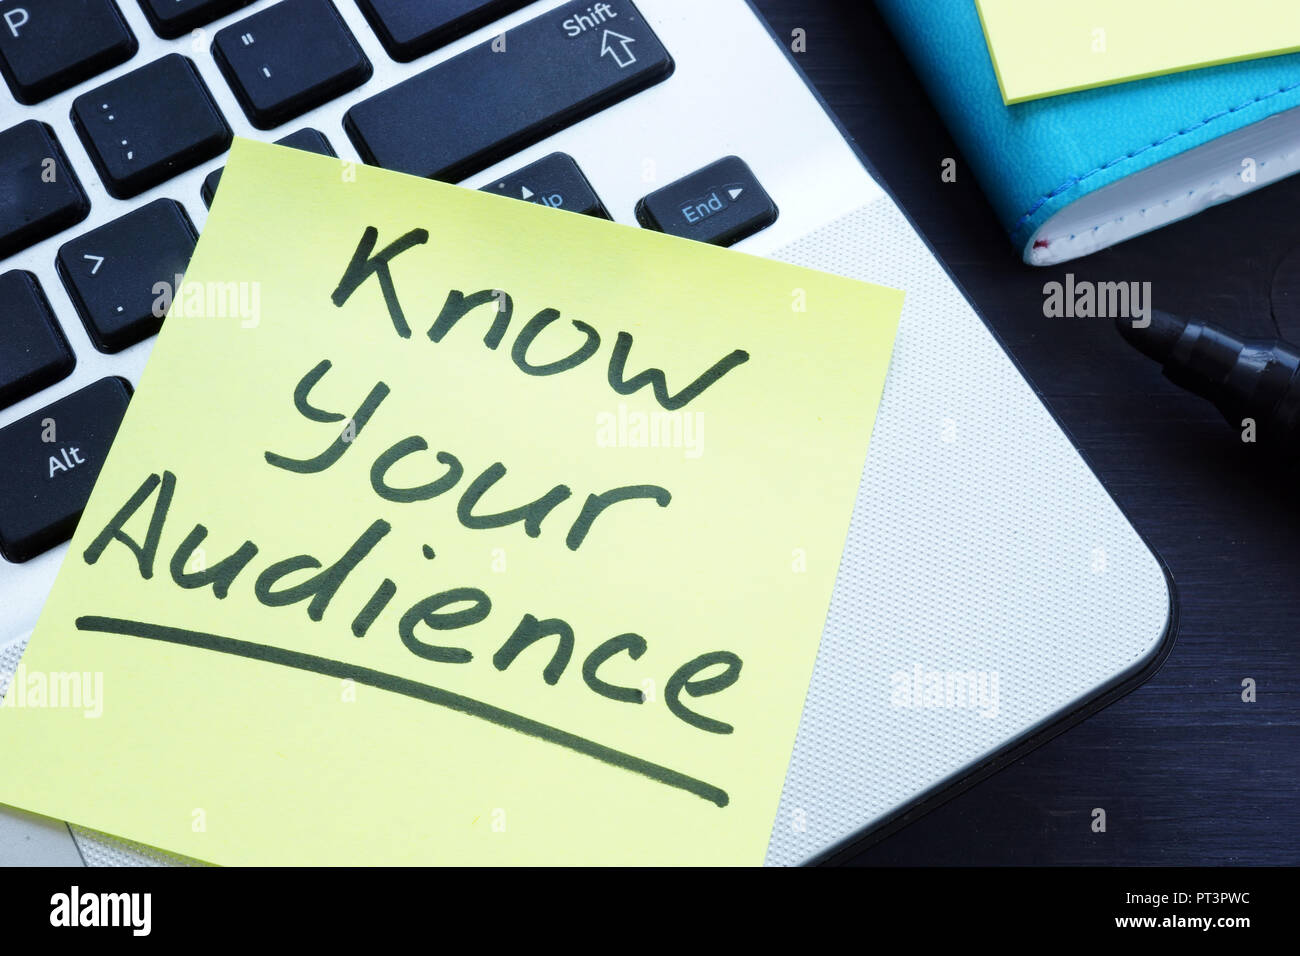 Know your audience written on the memo. Stock Photo